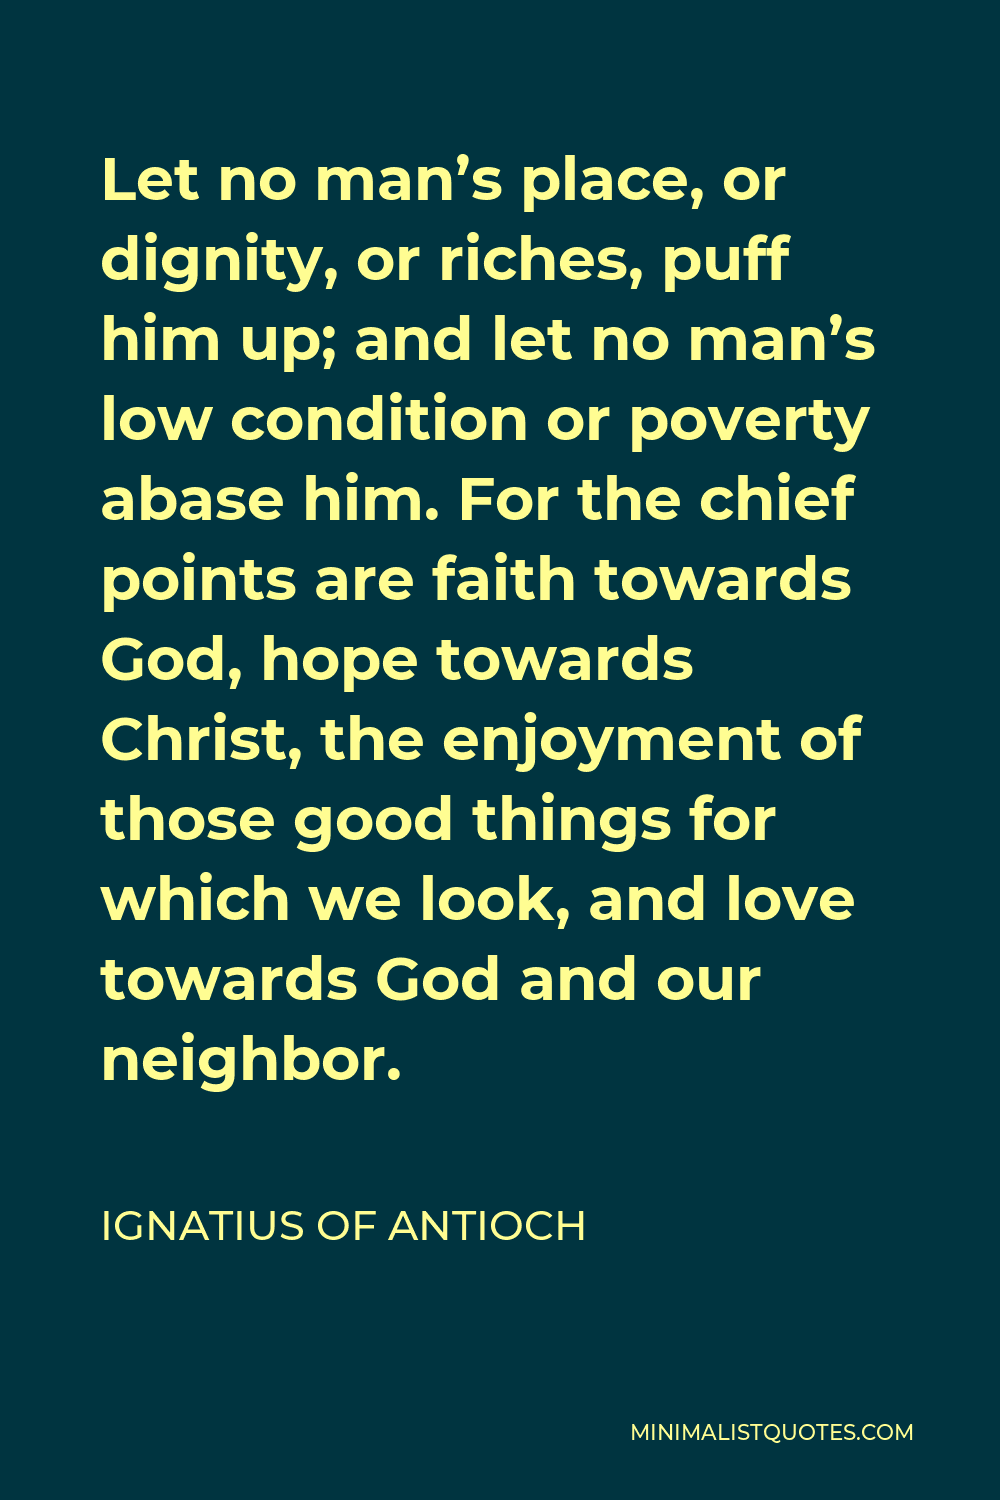 Ignatius of Antioch Quote - Let no man’s place, or dignity, or riches, puff him up; and let no man’s low condition or poverty abase him. For the chief points are faith towards God, hope towards Christ, the enjoyment of those good things for which we look, and love towards God and our neighbor.